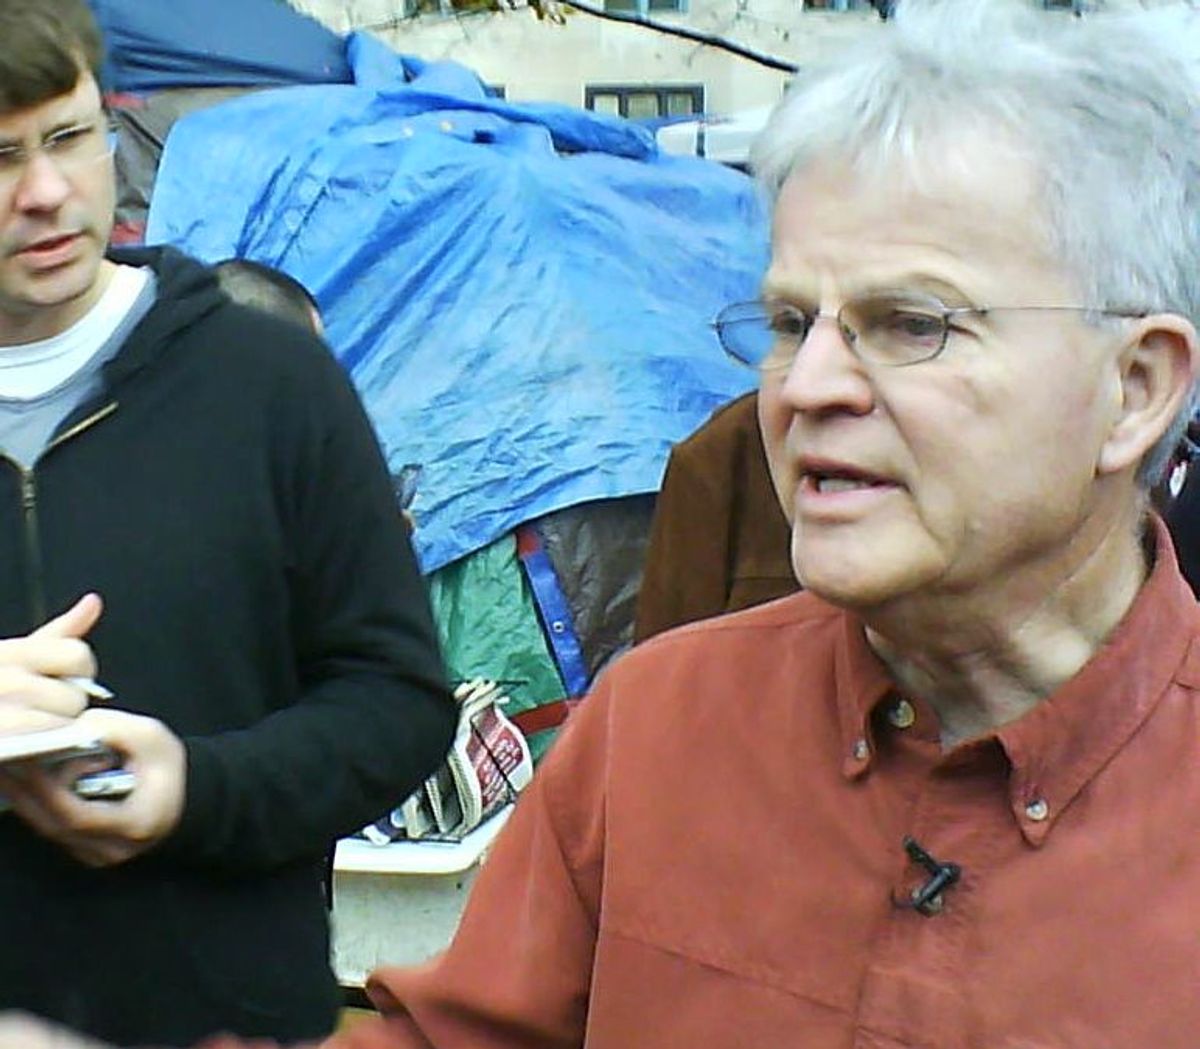  Republican presidential candidate Buddy Roemer visits Occupy DC on Nov. 23. 
   (Zaid Jilani)